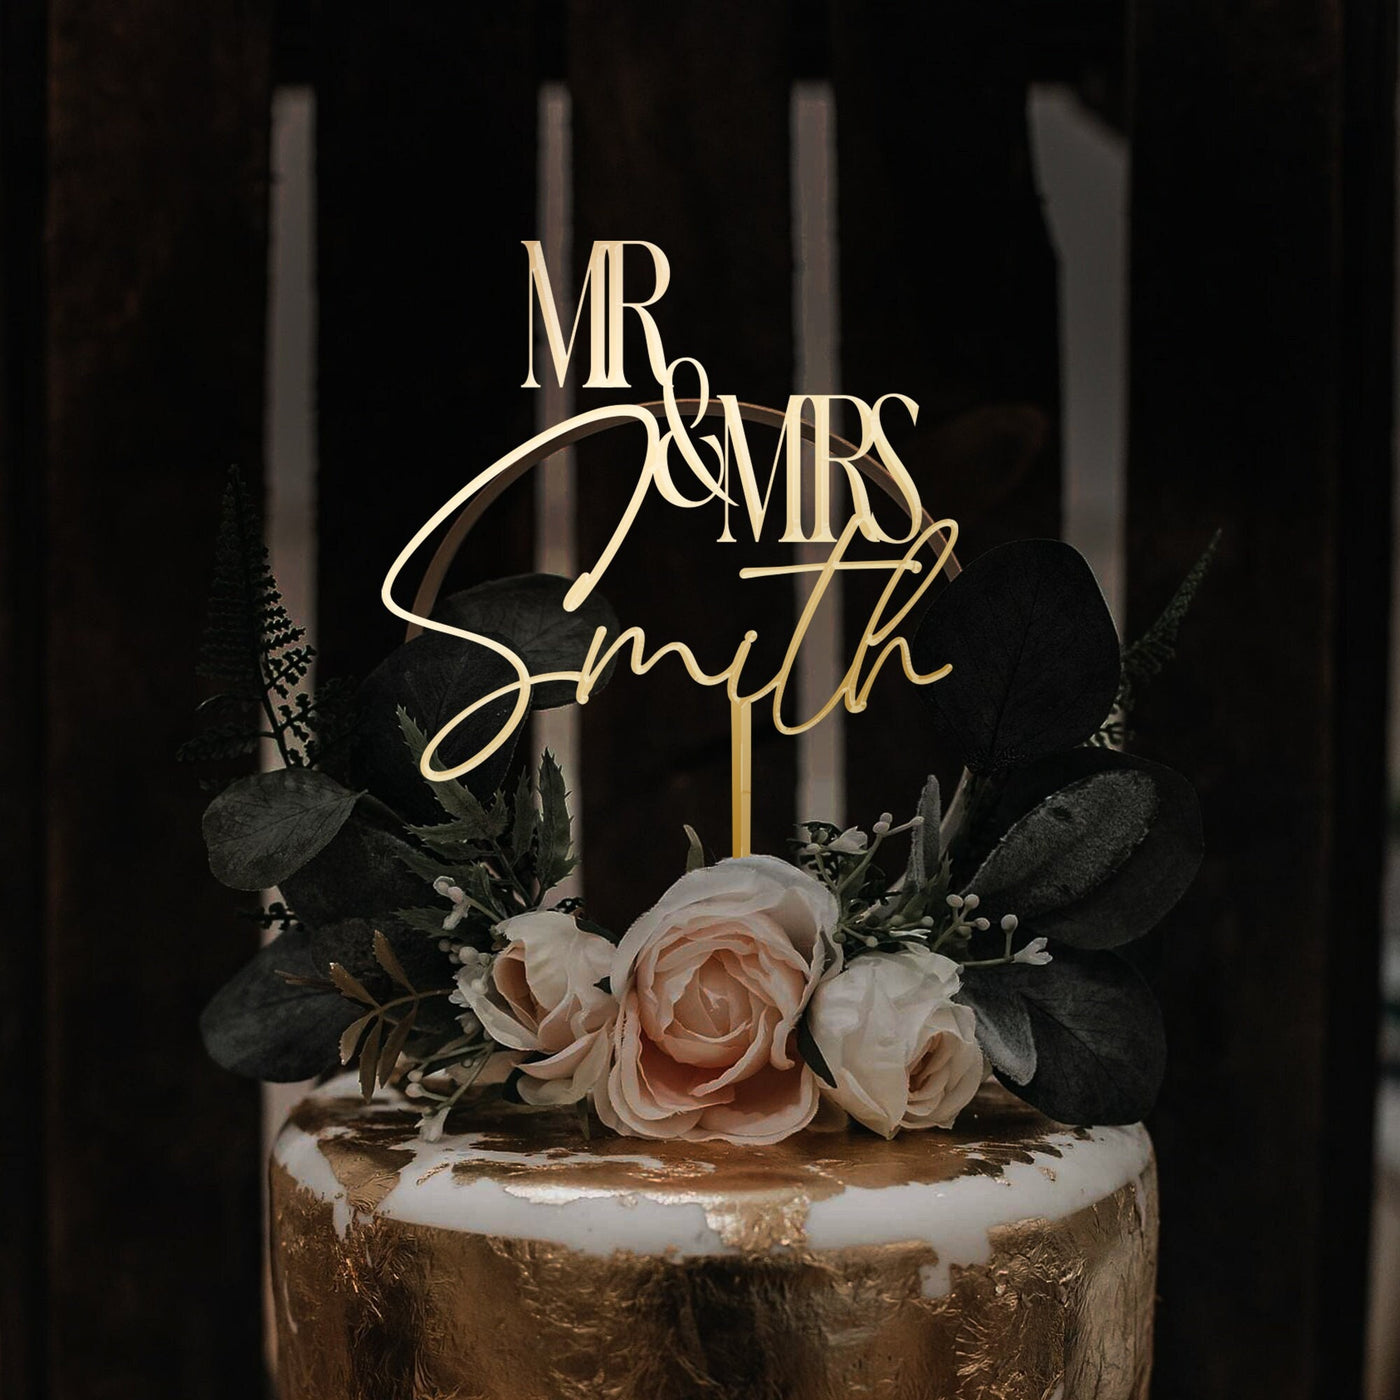 Metallic Silver Wedding Cake Topper for Wedding Mr and Mrs Custom Cake Topper Personalized Rustic Cake Topper